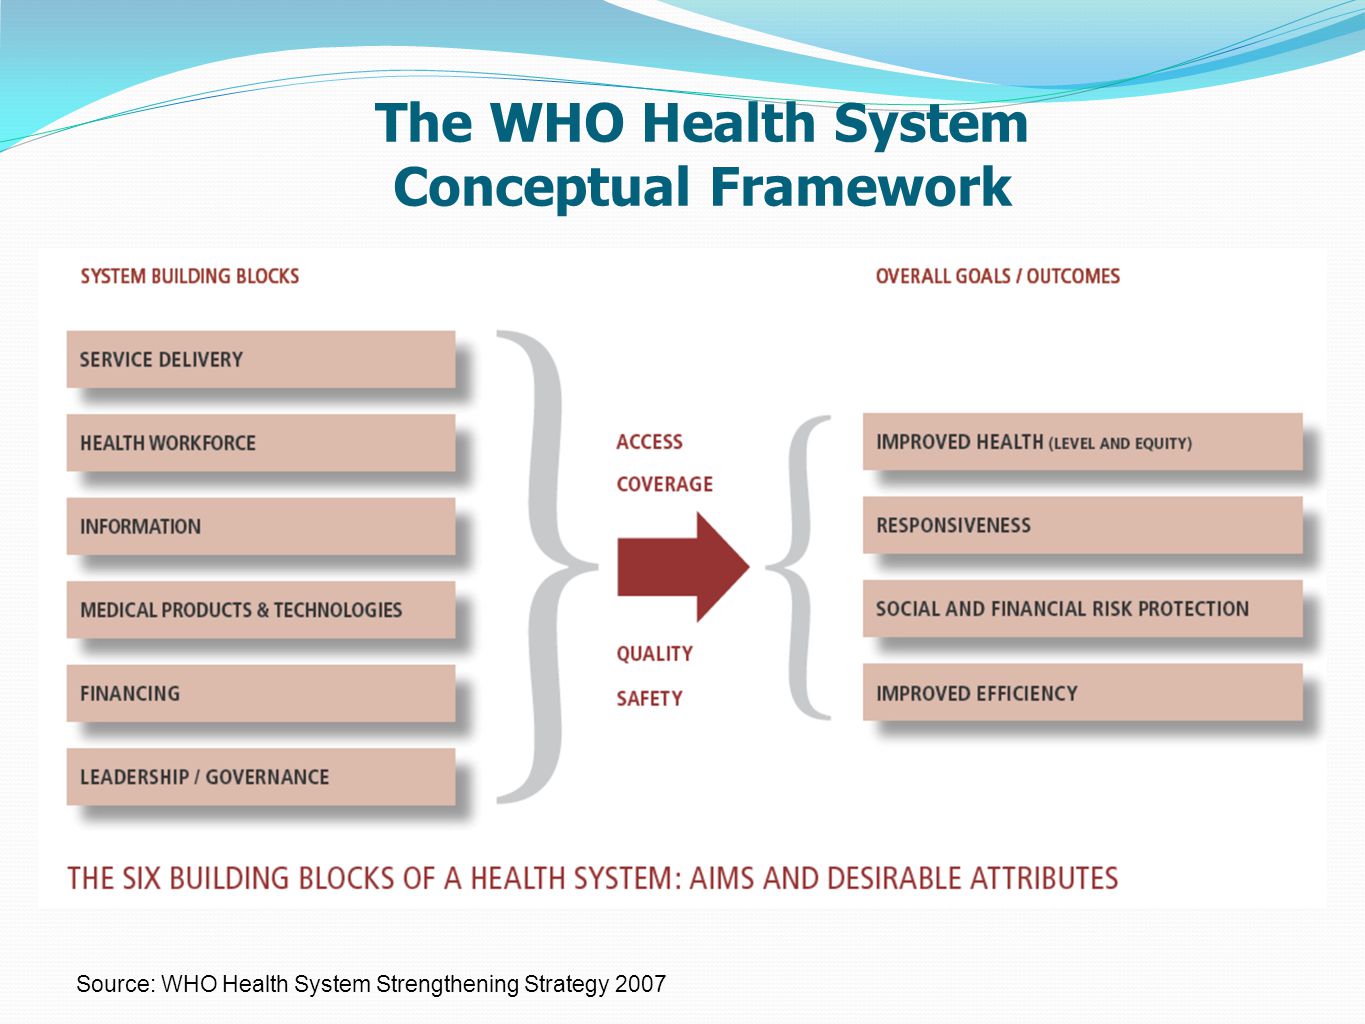 The WHO Health System Conceptual Framework